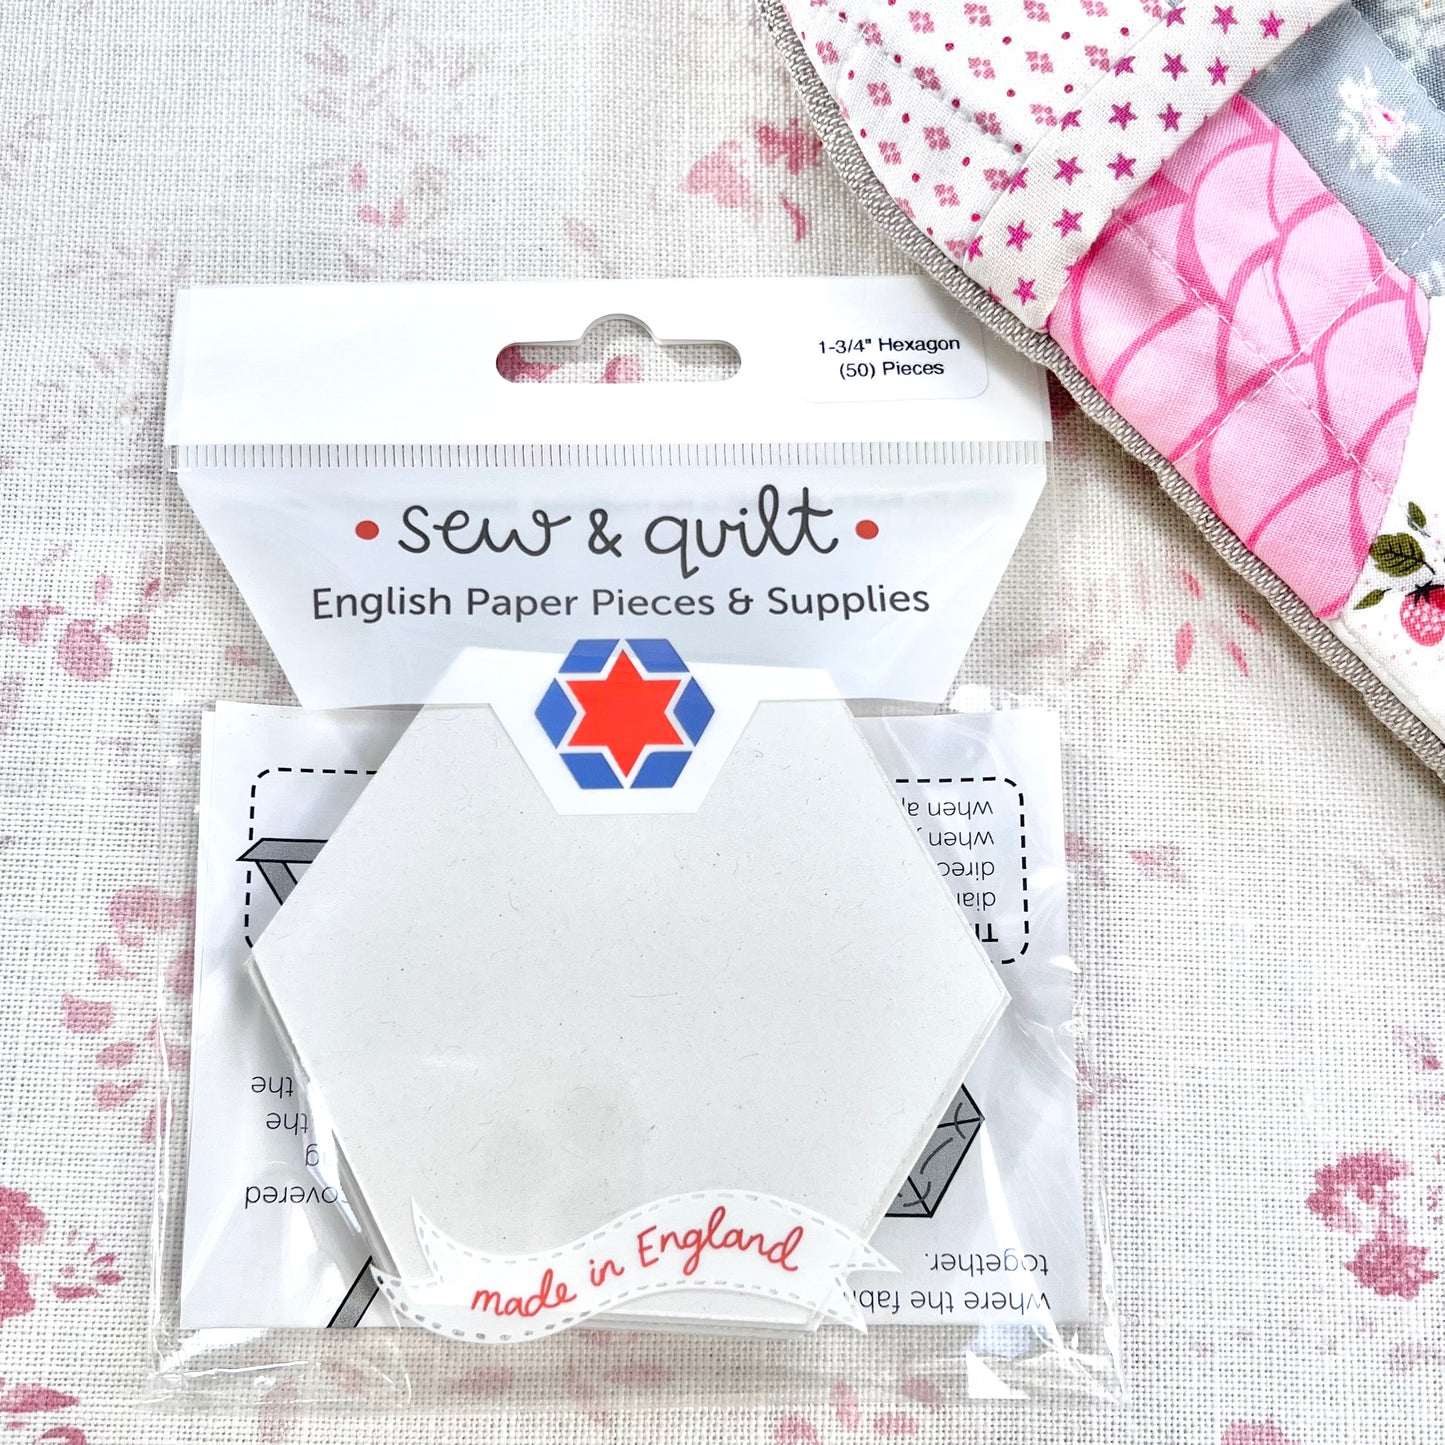 Sew & Quilt - English Paper Piecing Templates 1-3/4" Hexagon x 50